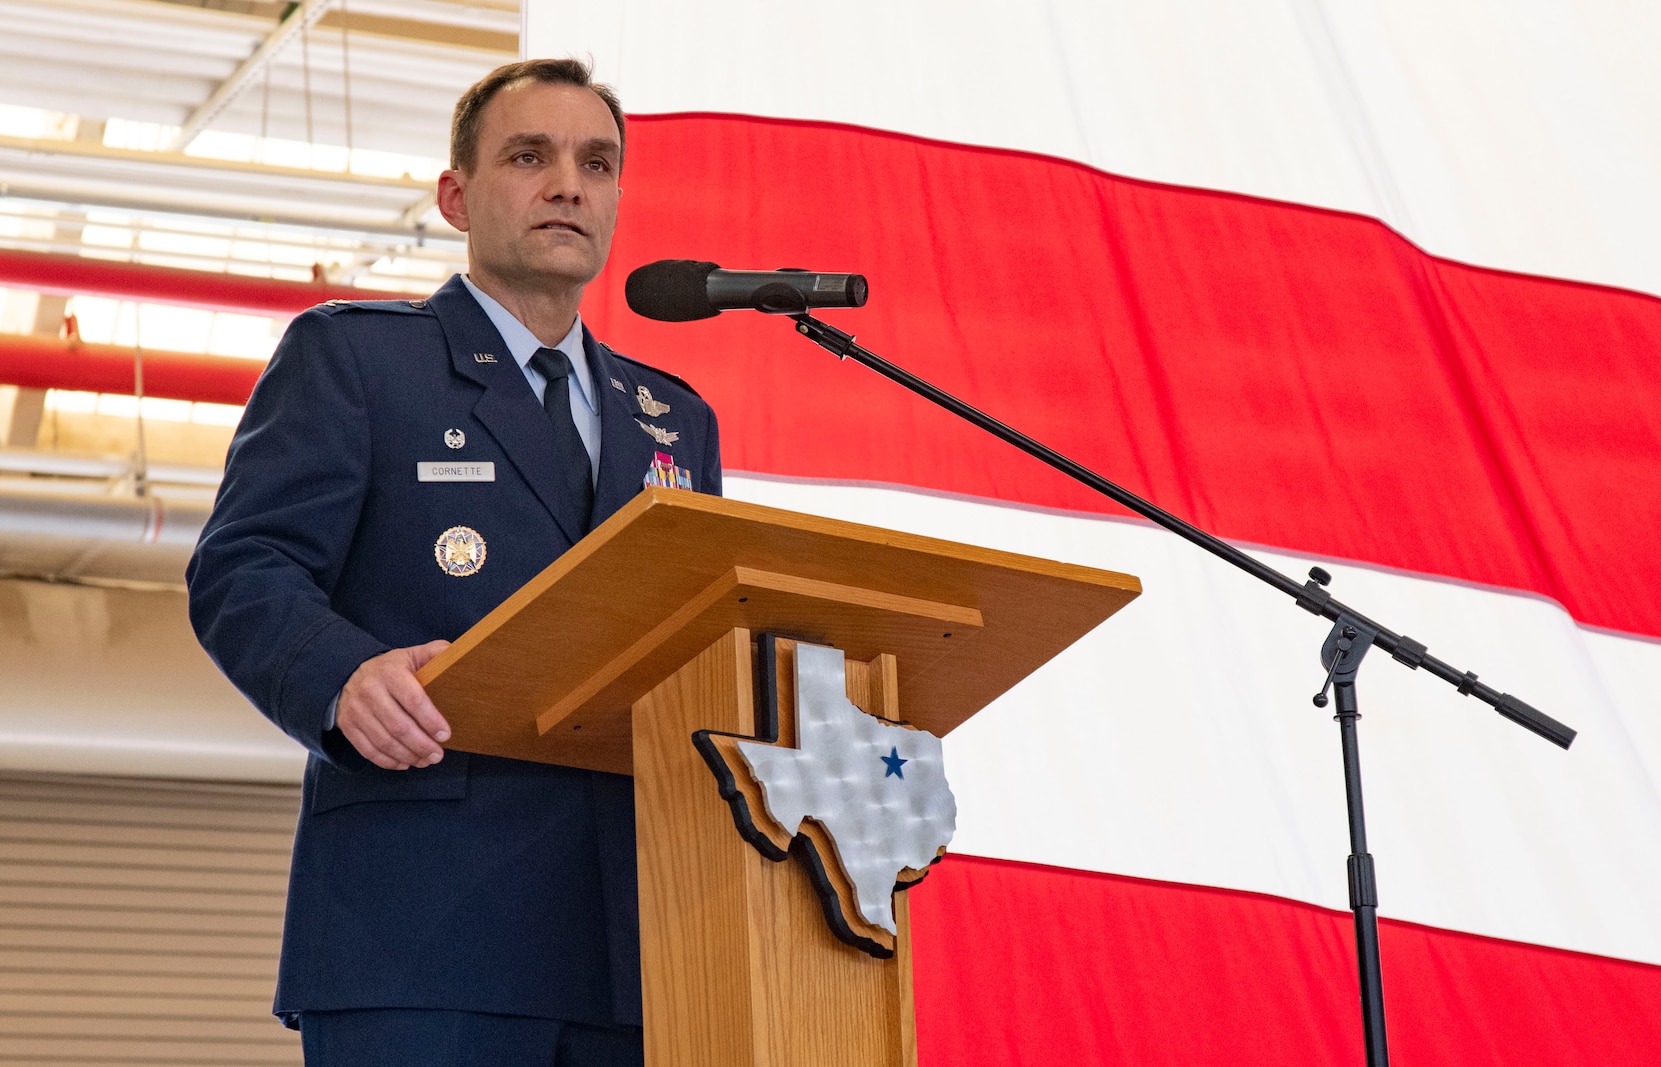 Air Force officer stands behind a podium.